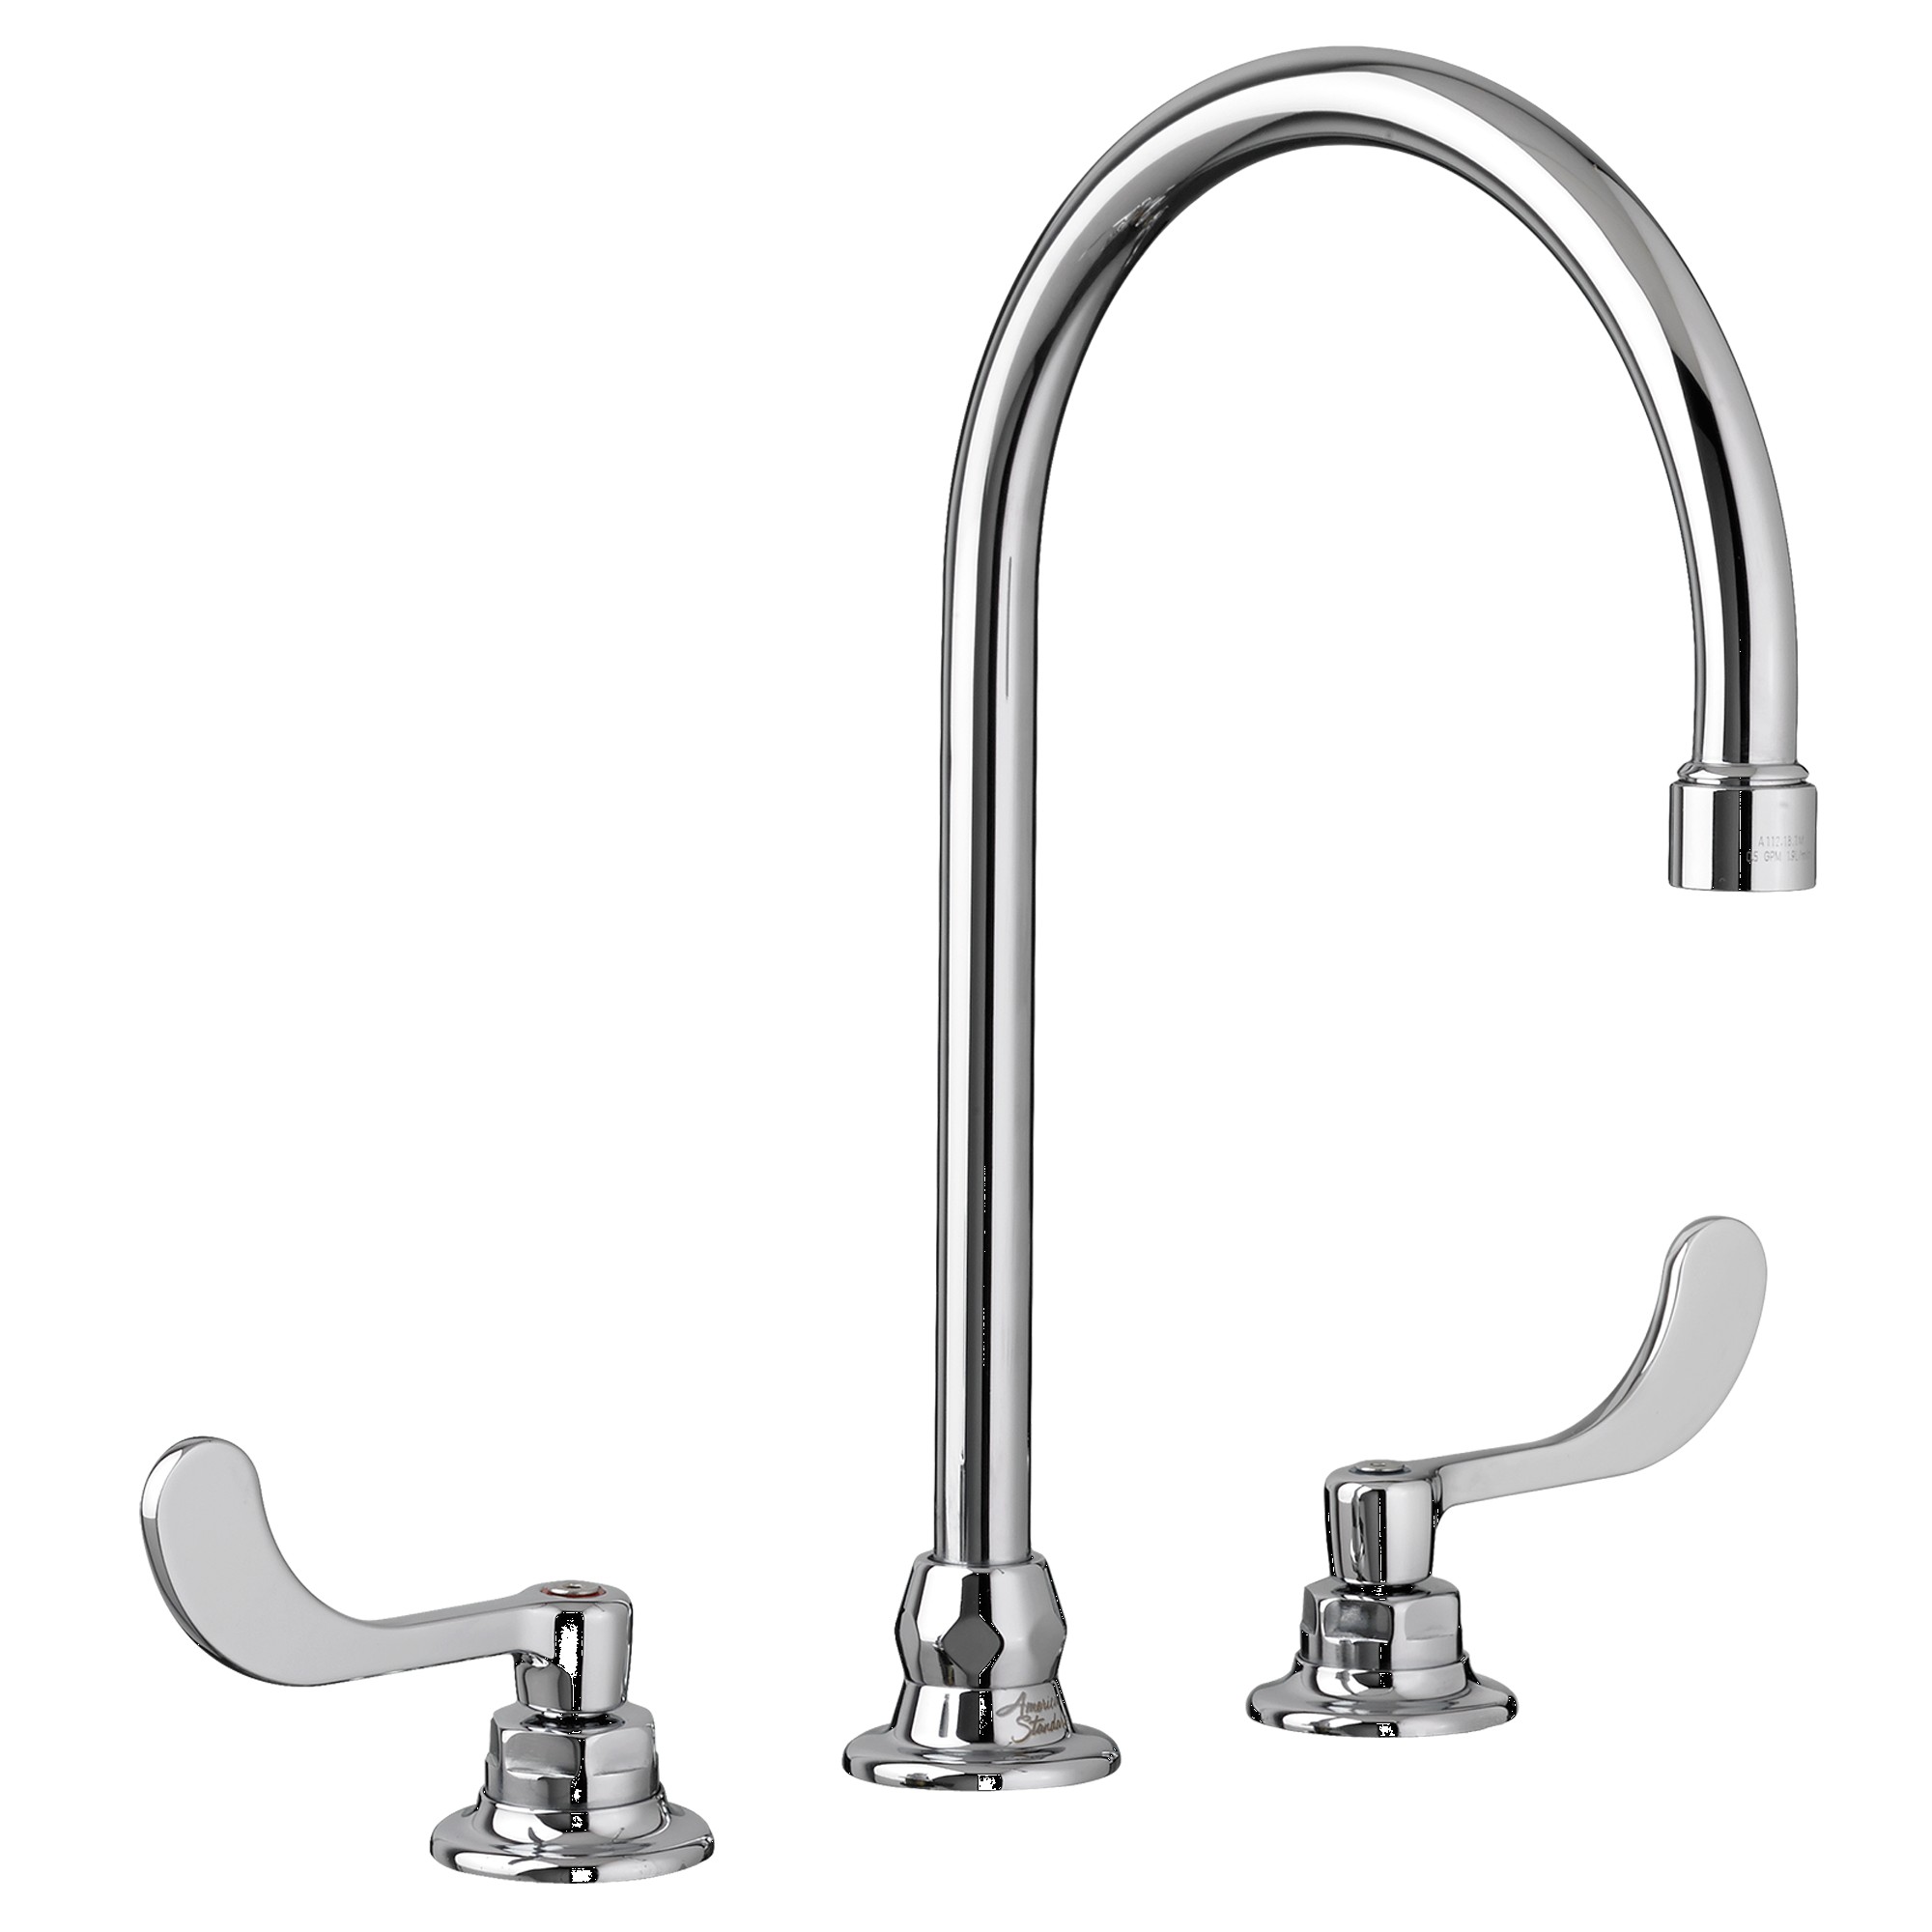 American Standard | 6540.277.002 | AMERICAN STANDARD 6540.277 MONTERREY WIDESPREAD GOOSENECK FAUCET CP 002 POLISHED CHROME WITH WRIST BLADE HANDLES .5GPM